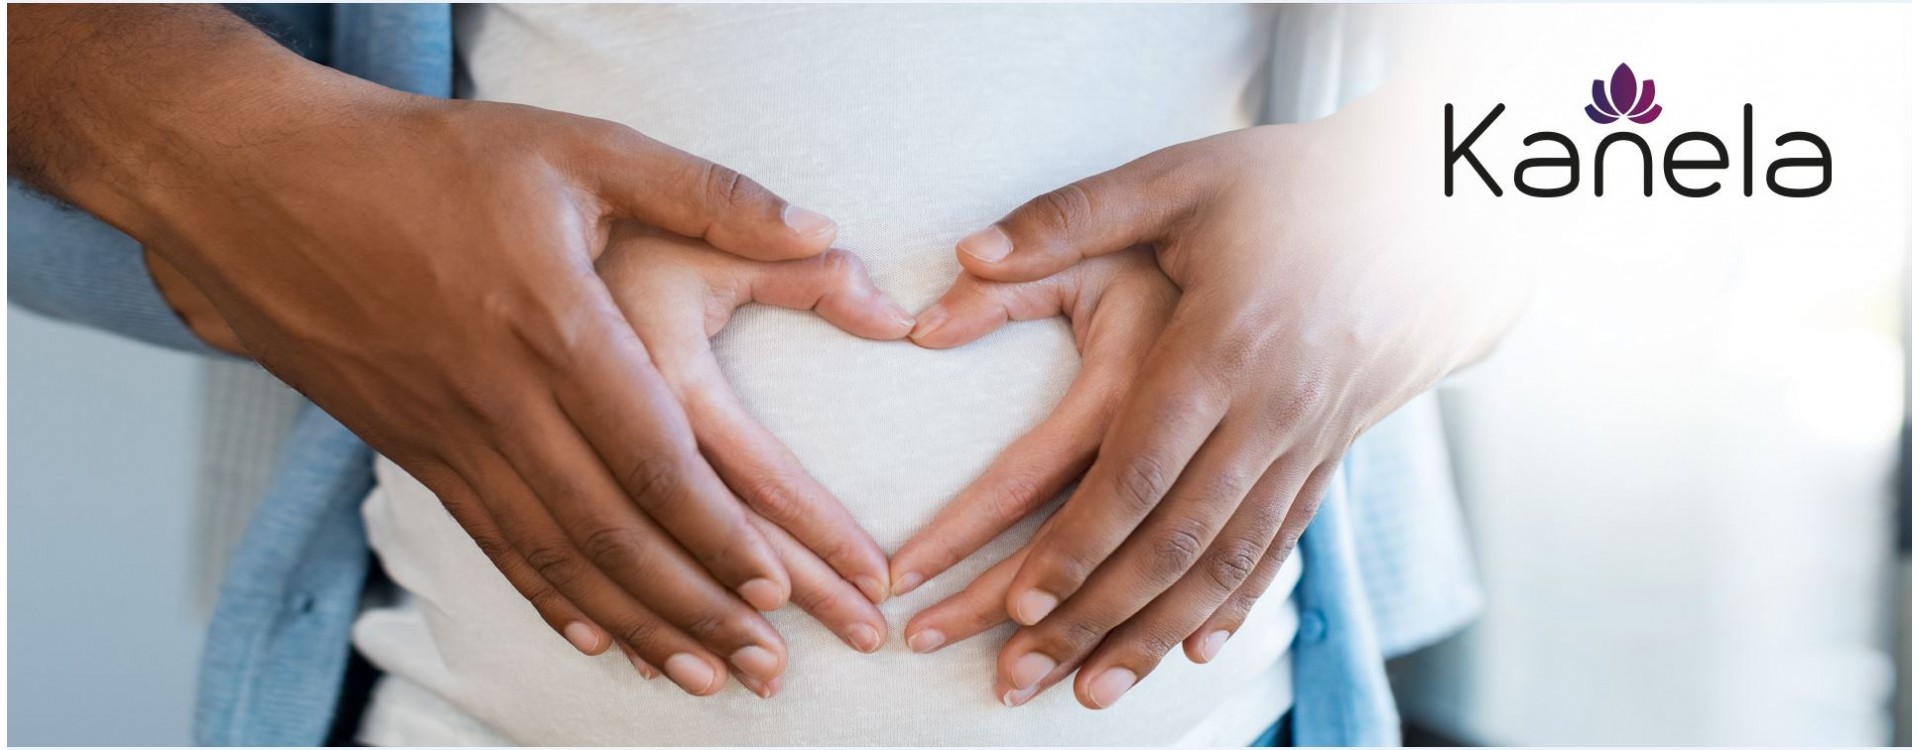 Wanting to have children - what helps to finally get pregnant?